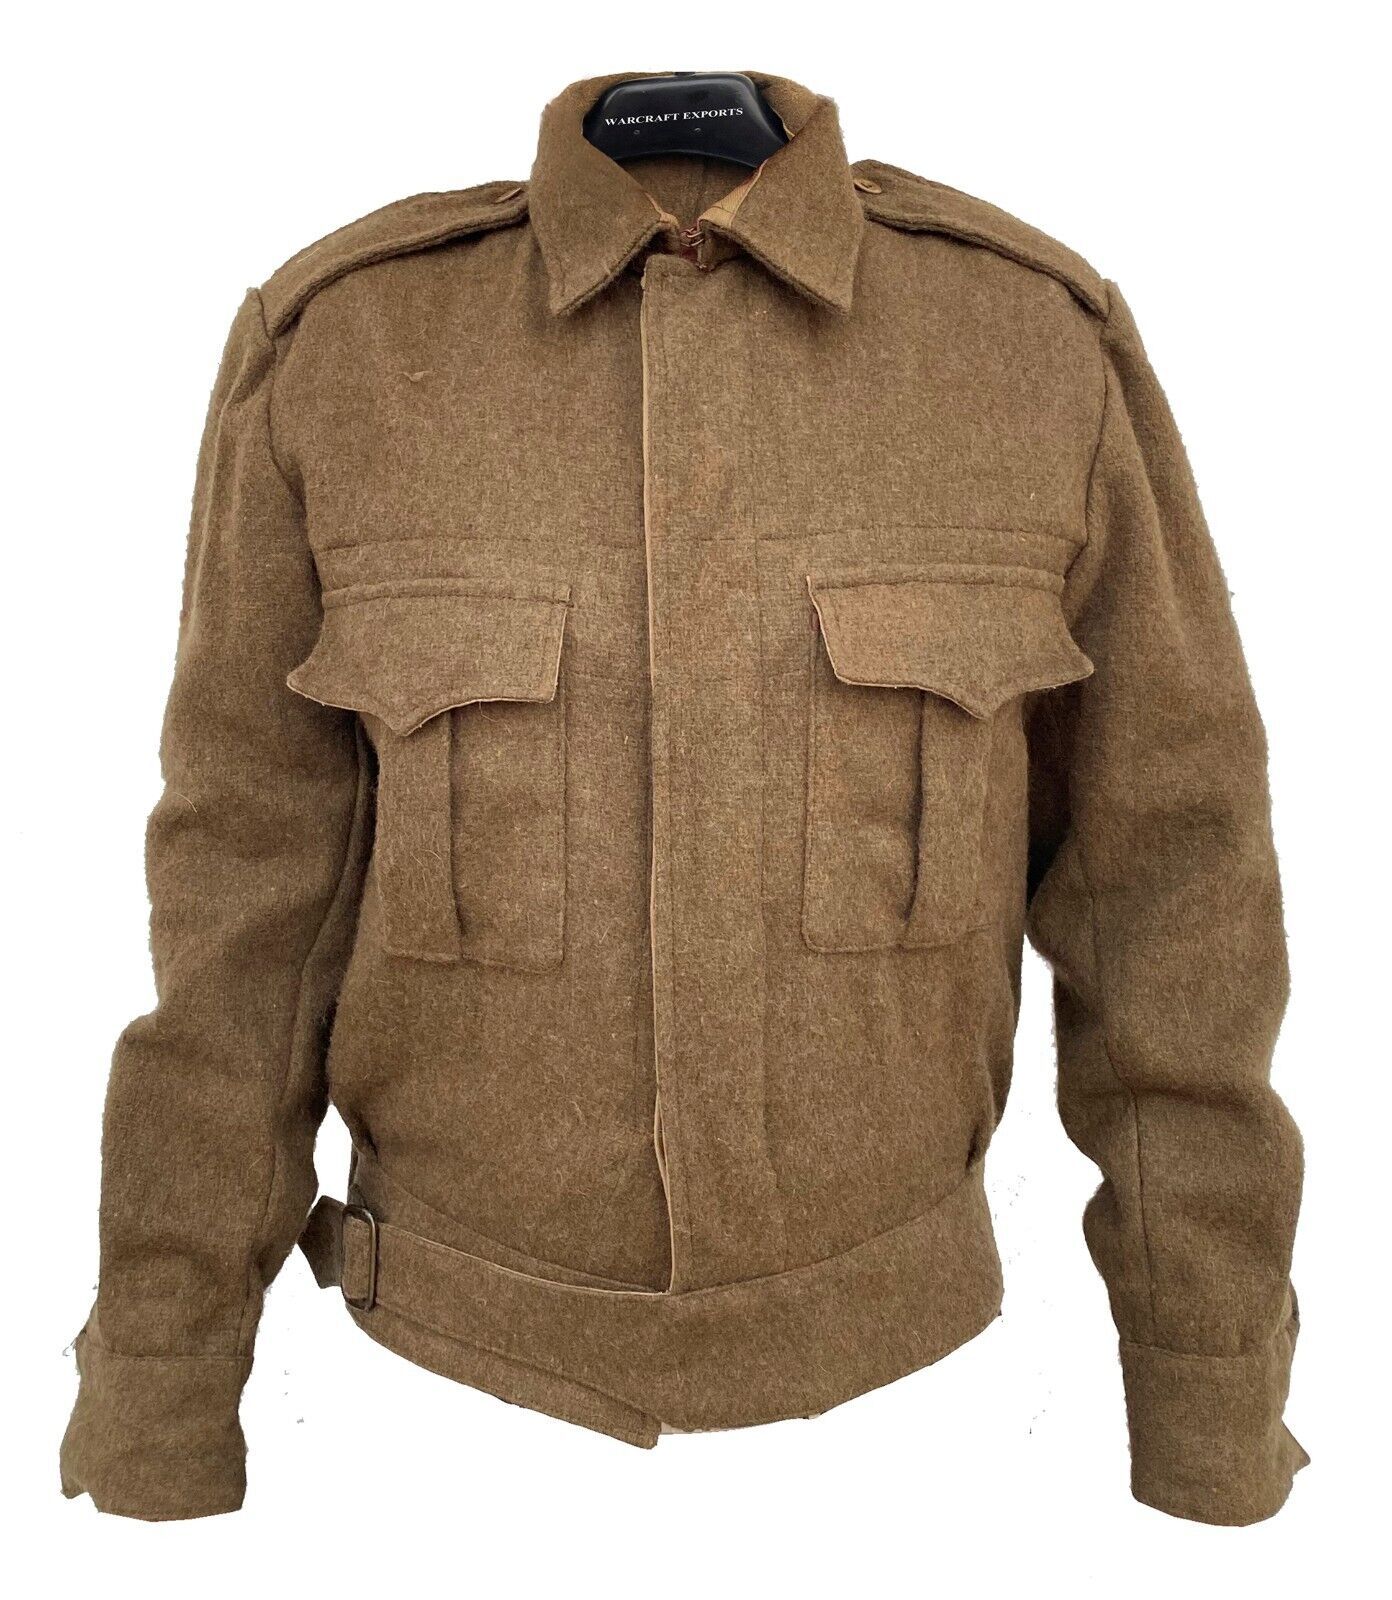 Primary image for Repro WW2 British Army 37 Pattern Battle Uniform Tunic - Khaki Color (44 Inches)